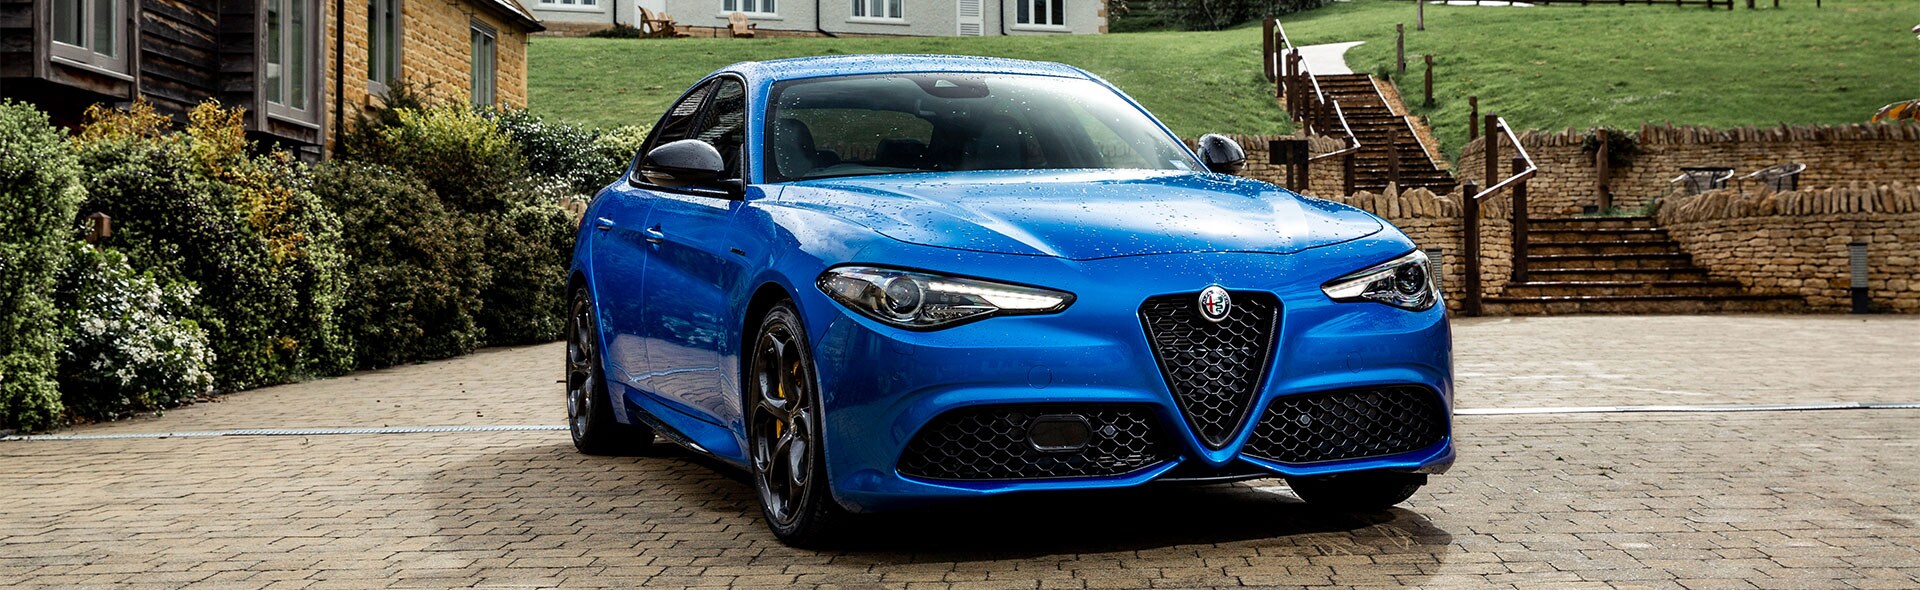 Blue Alfa Romeo Giulia in the coutryside from the front.